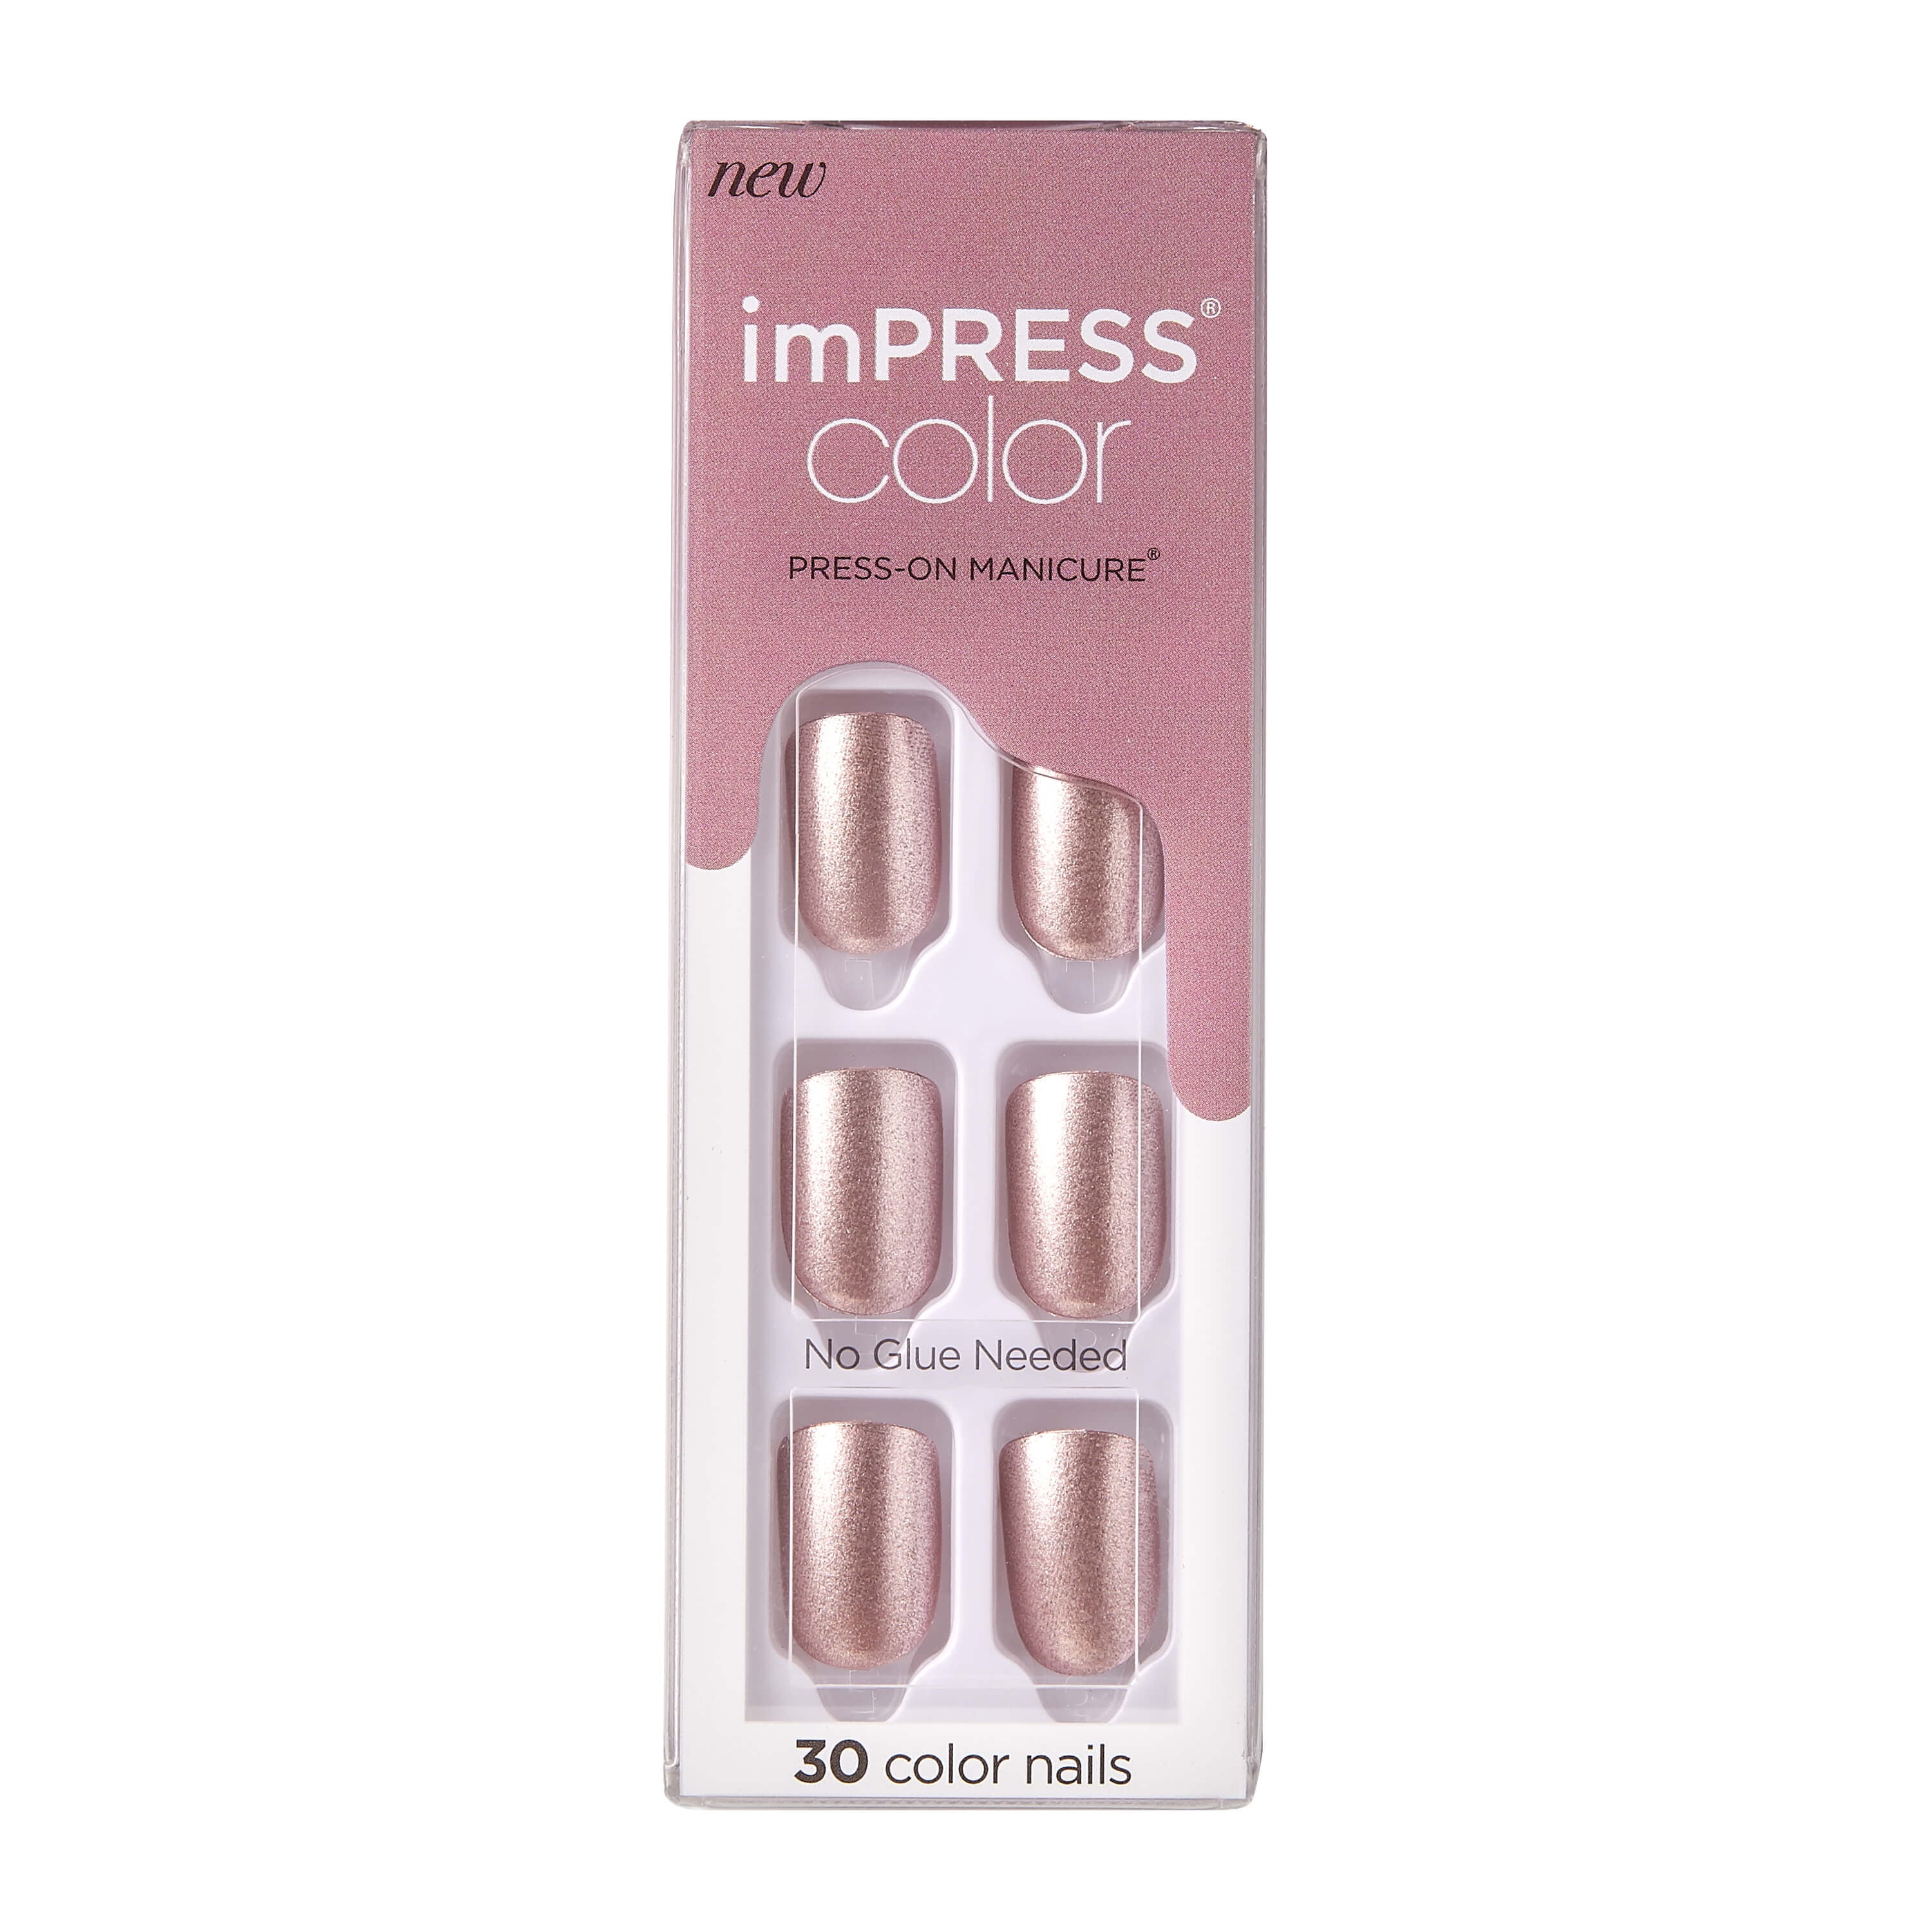 KISS imPRESS Color Press-On Manicure, Gel Nail Kit, PureFit Technology,  Short Length, “Beach Waves”, Polish-Free Solid Color Mani, Includes Prep  Pad, Mini File, Cuticle Stick, and 30 Fake Nails 